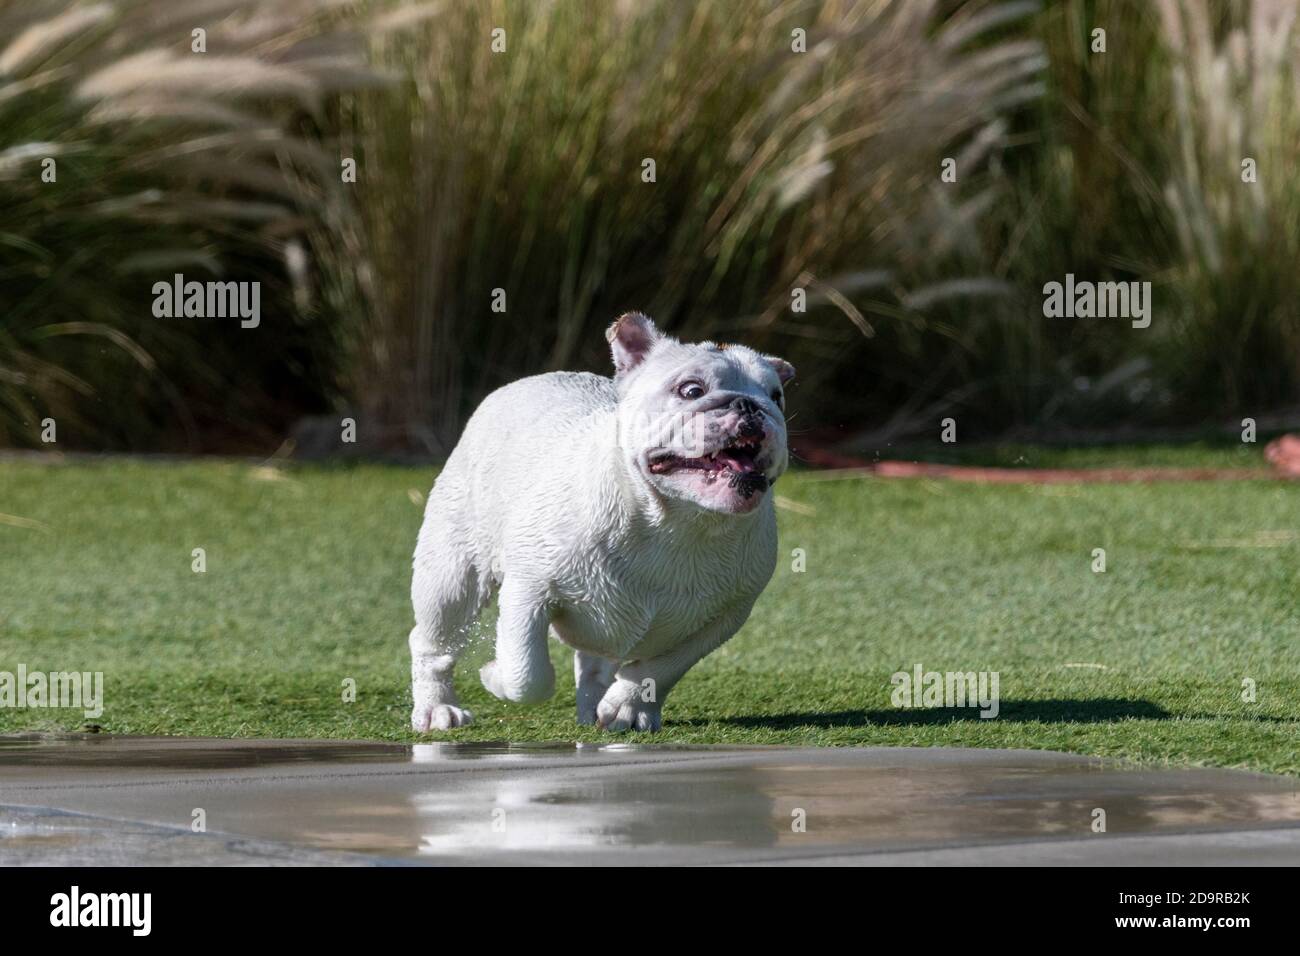 A wet white English Bulldog running across the grass after getting out of a pool Stock Photo